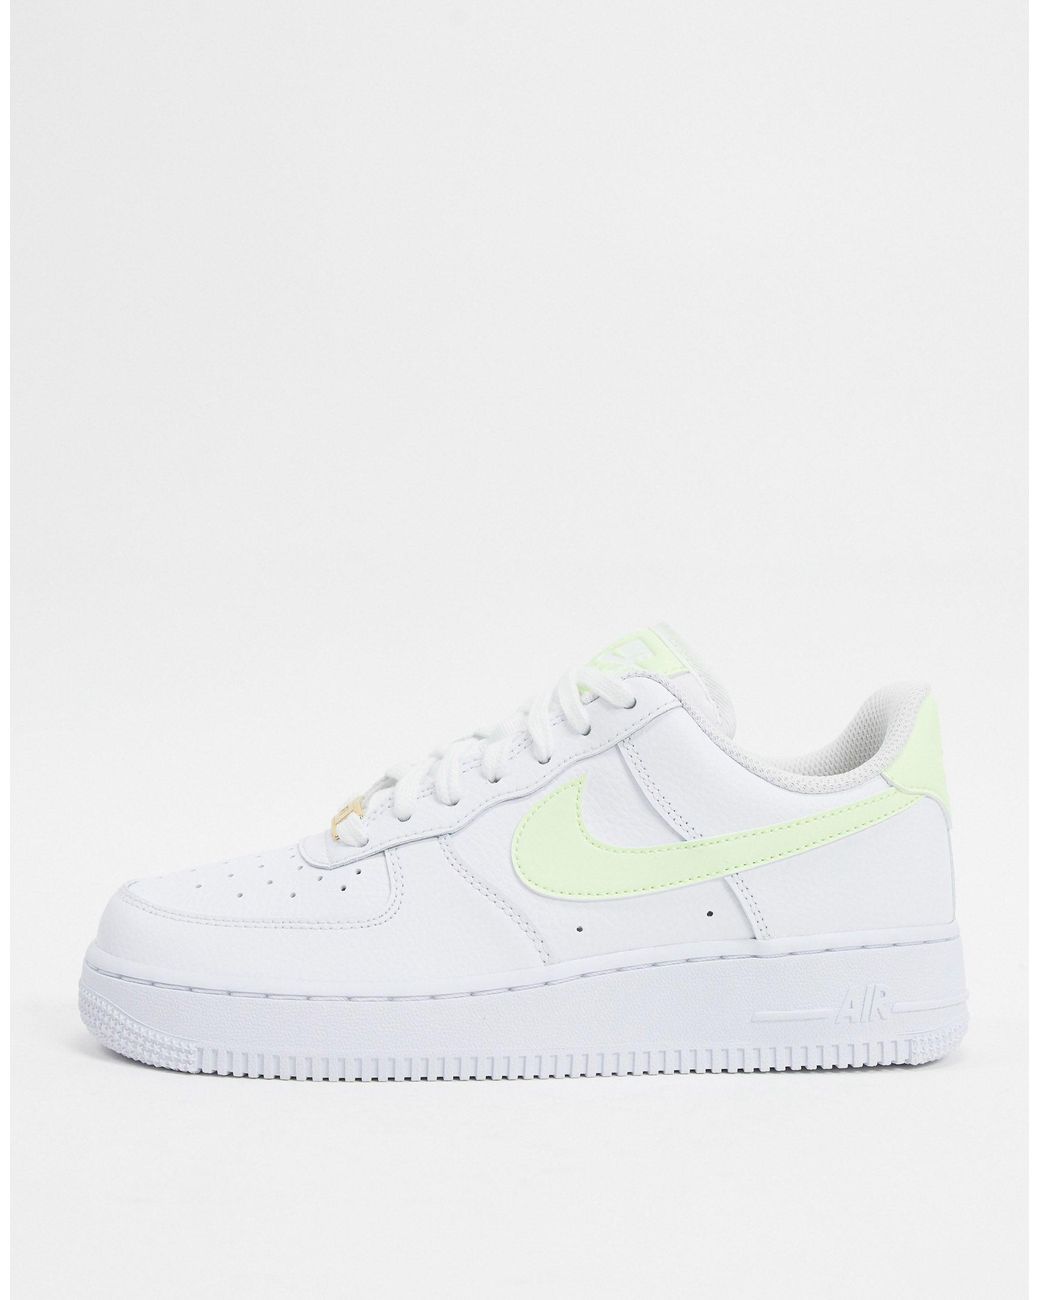 Nike Rubber Air Force 1 '07 White And Fluro Green Sneakers | Lyst Australia